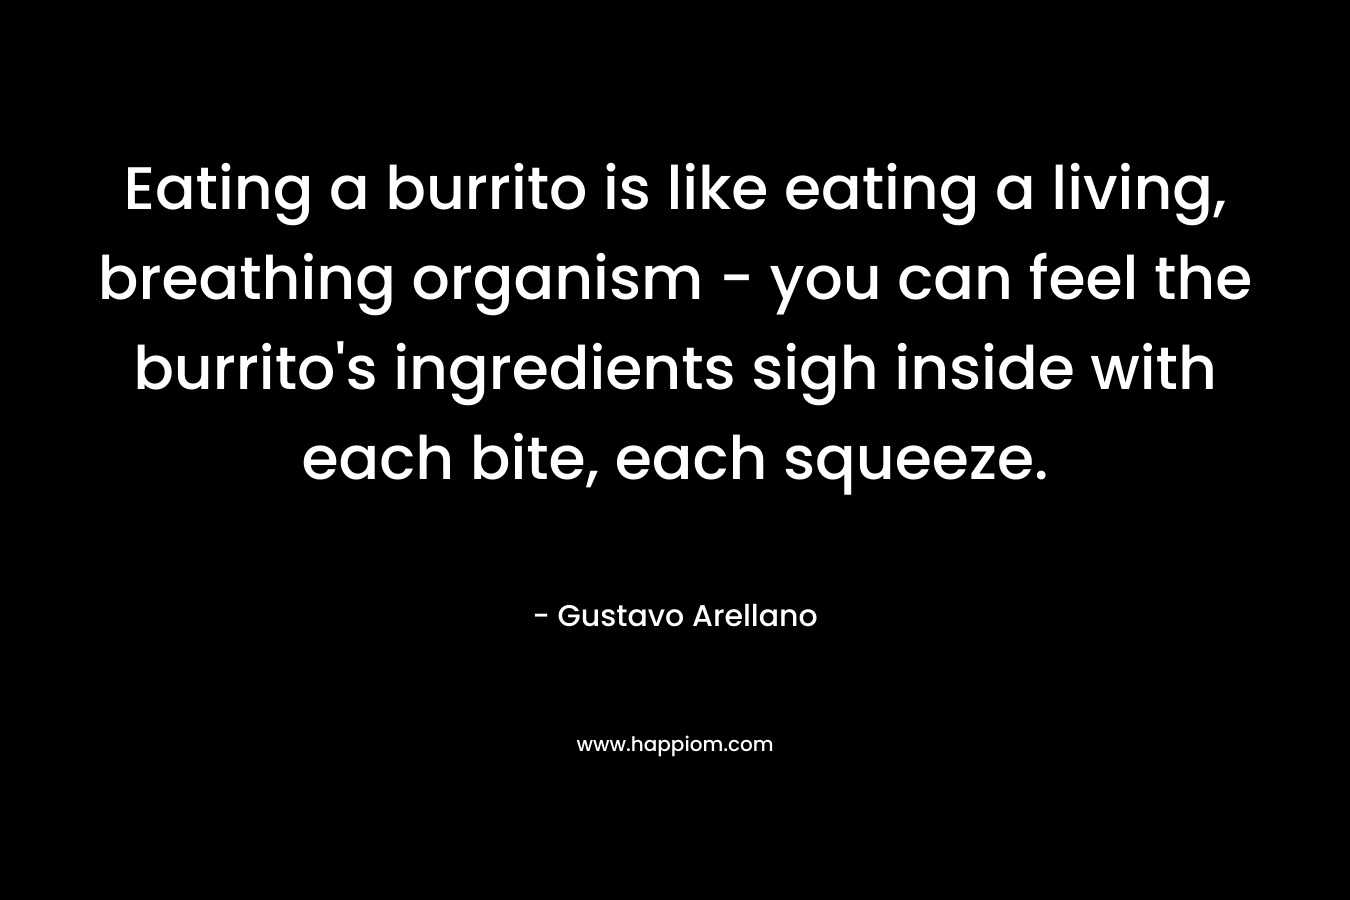 Eating a burrito is like eating a living, breathing organism - you can feel the burrito's ingredients sigh inside with each bite, each squeeze.